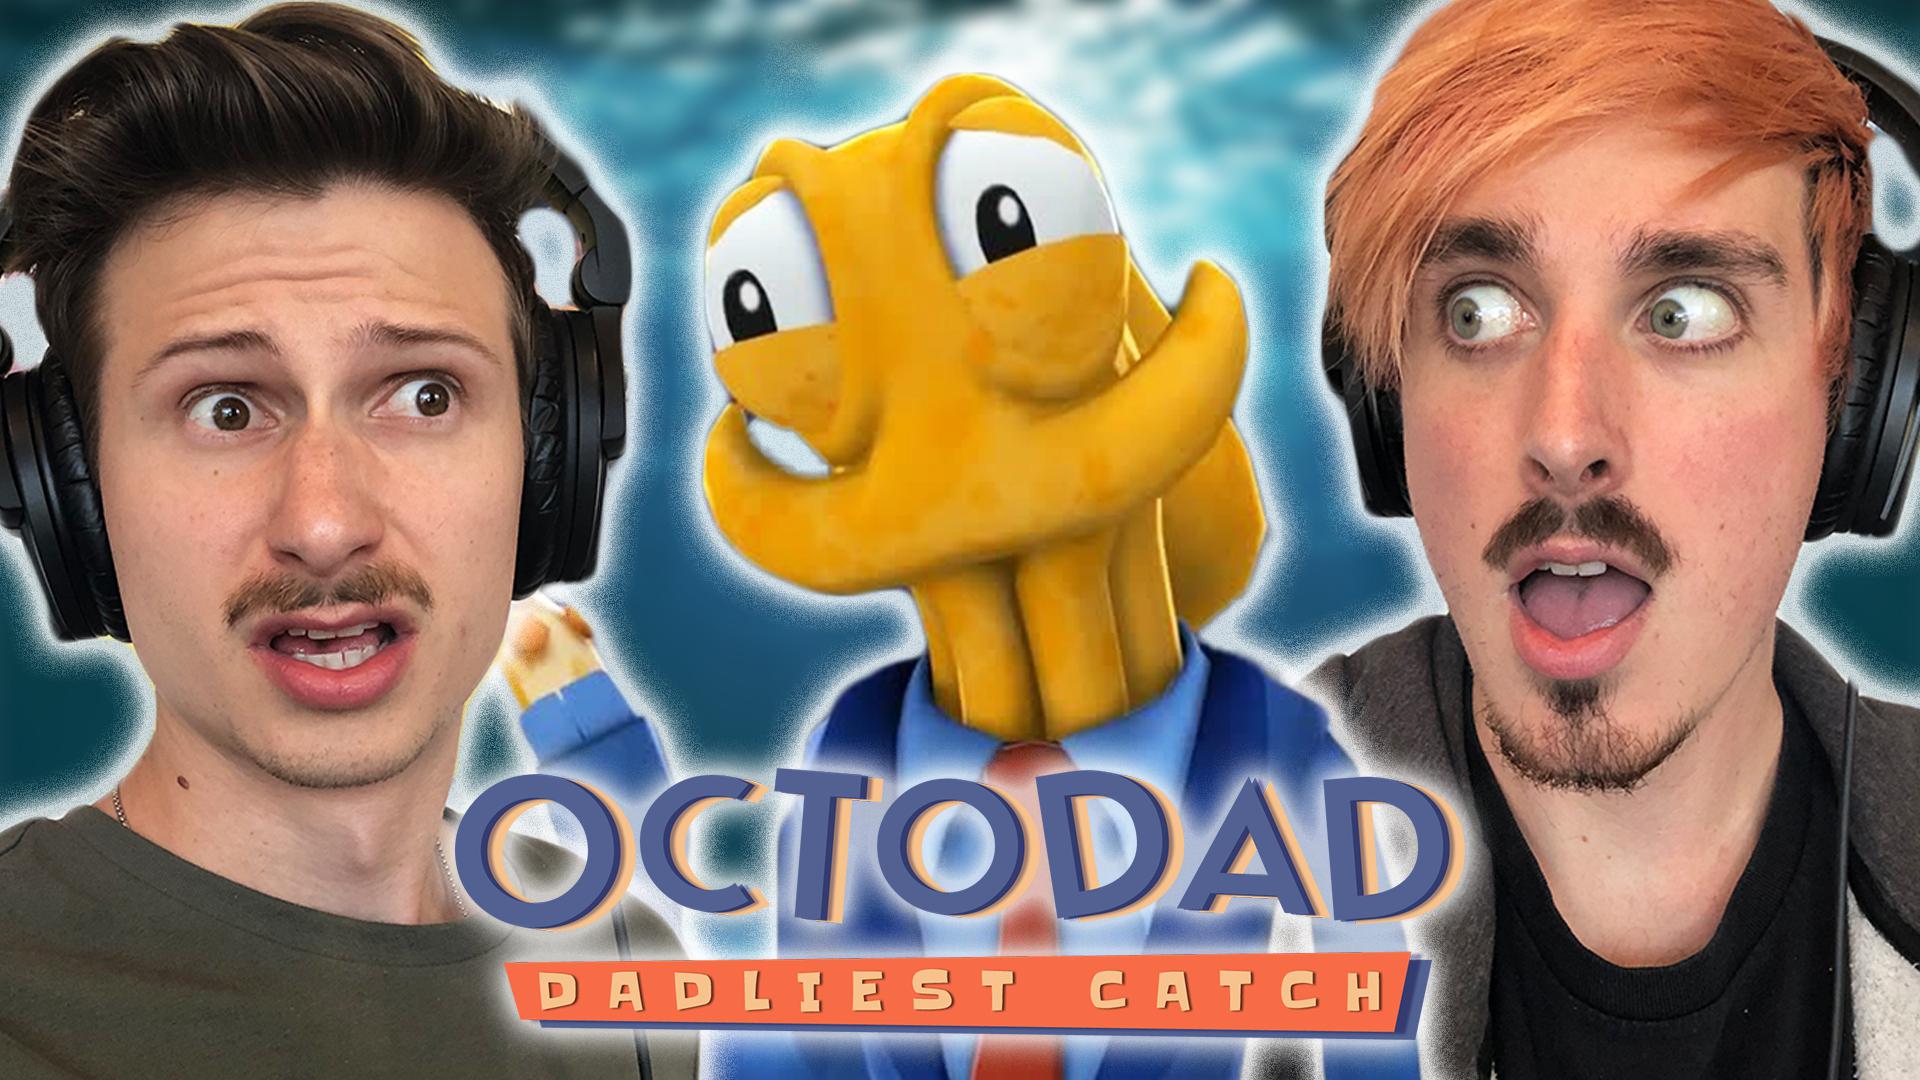 We Become One With The Octopus In Octodad